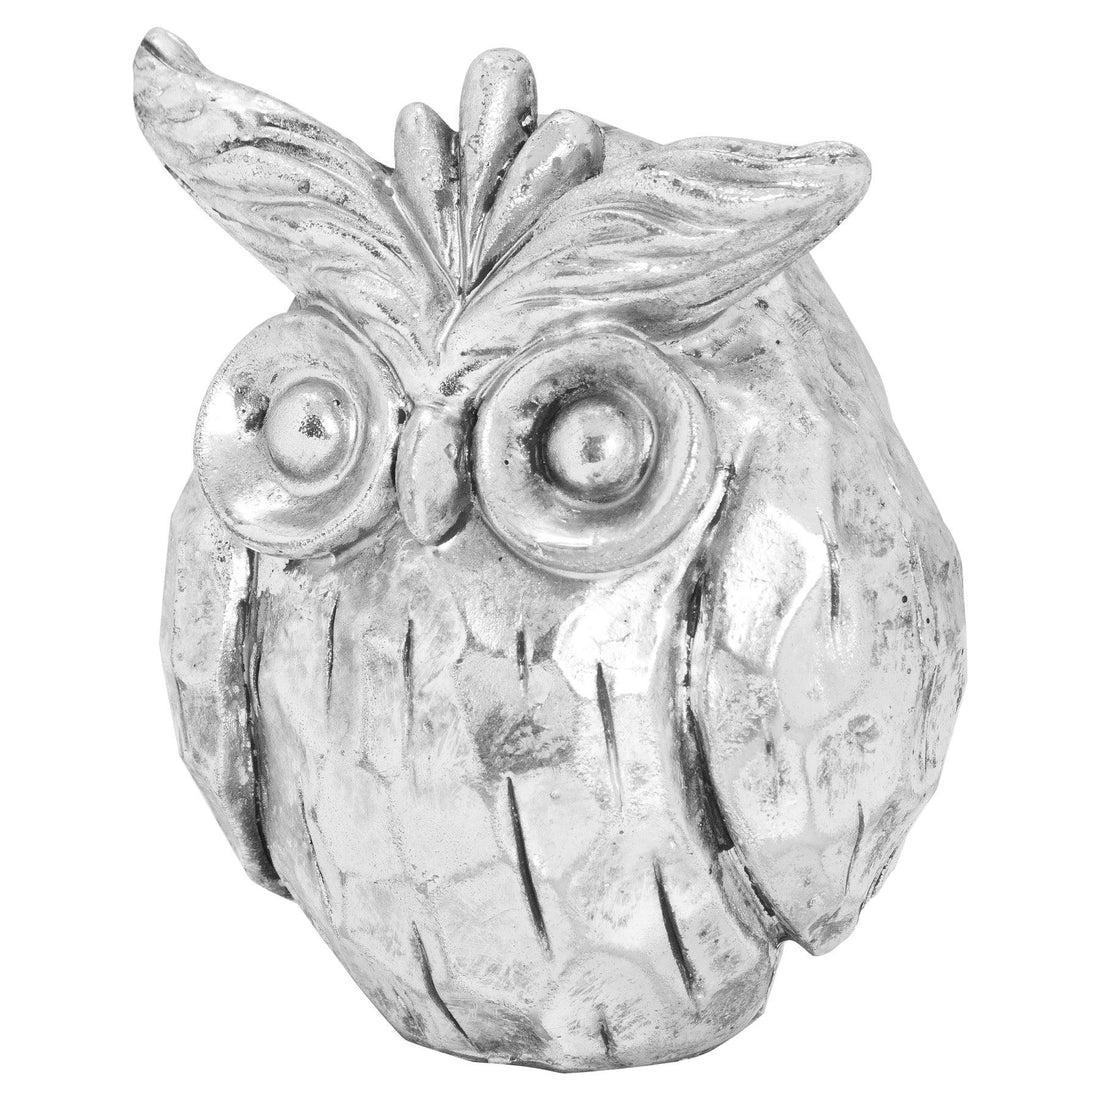 Otis The Silver Ceramic Owl - £21.95 - Gifts & Accessories > Ornaments > Ornaments 